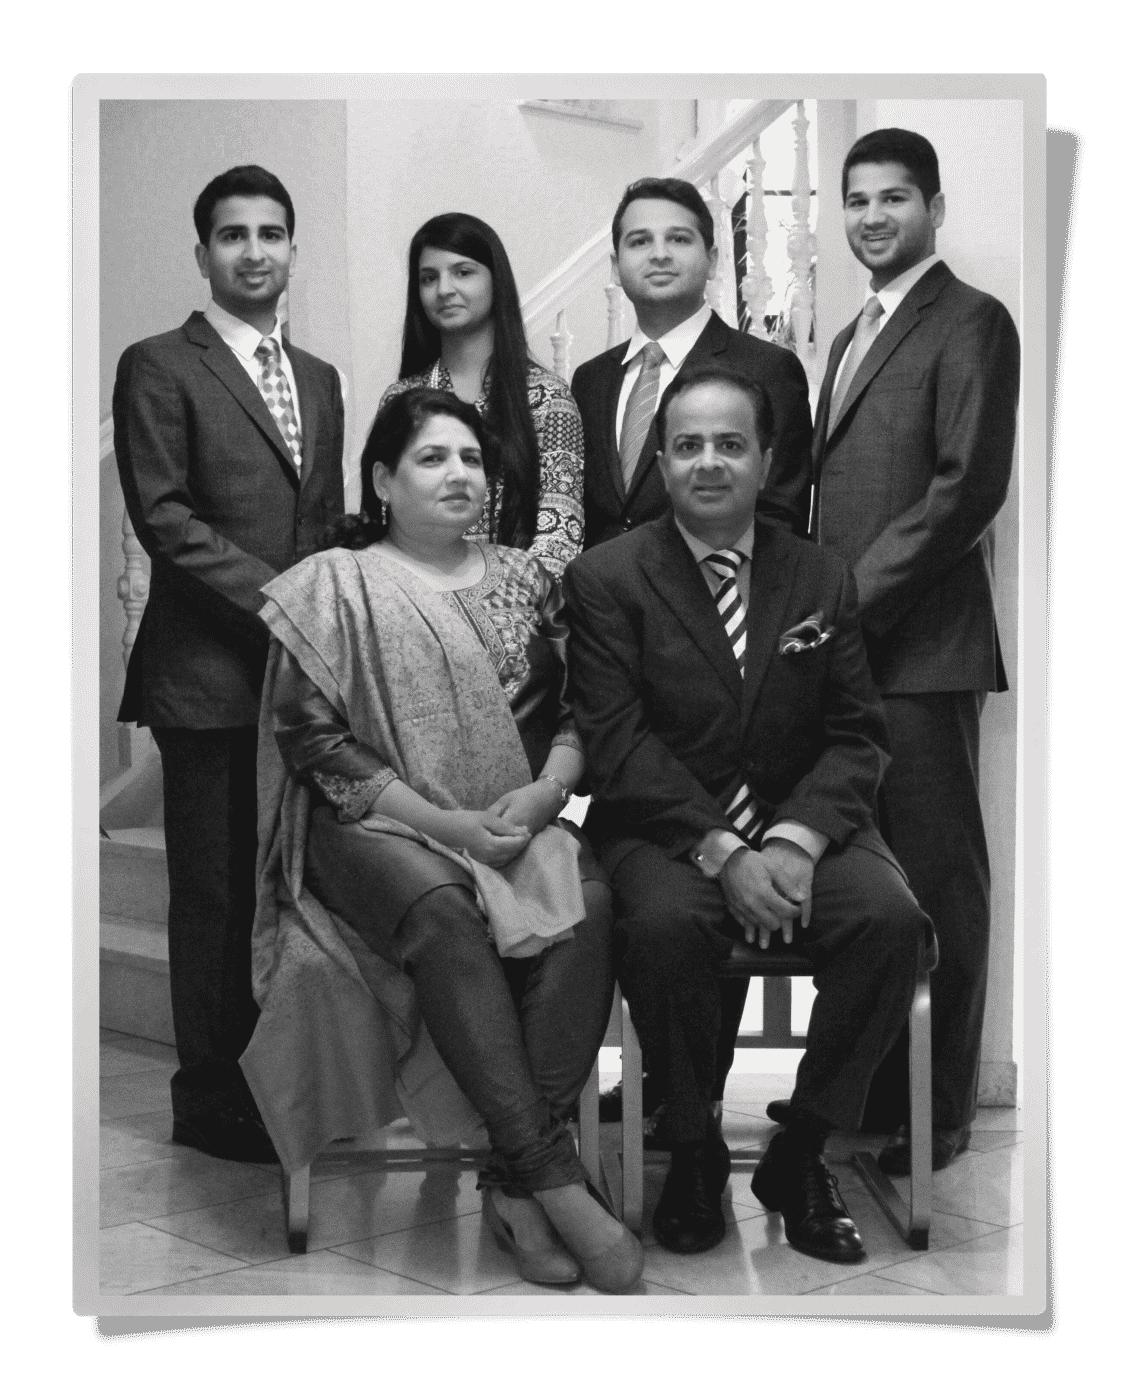 Family portrait of Vinit Rakyan, seated next to his wife, Sunita. Rakyan founded Global Gems. Standing behind them are their sons (from left) Archit, Anshul and Ashir, who are involved in the business.